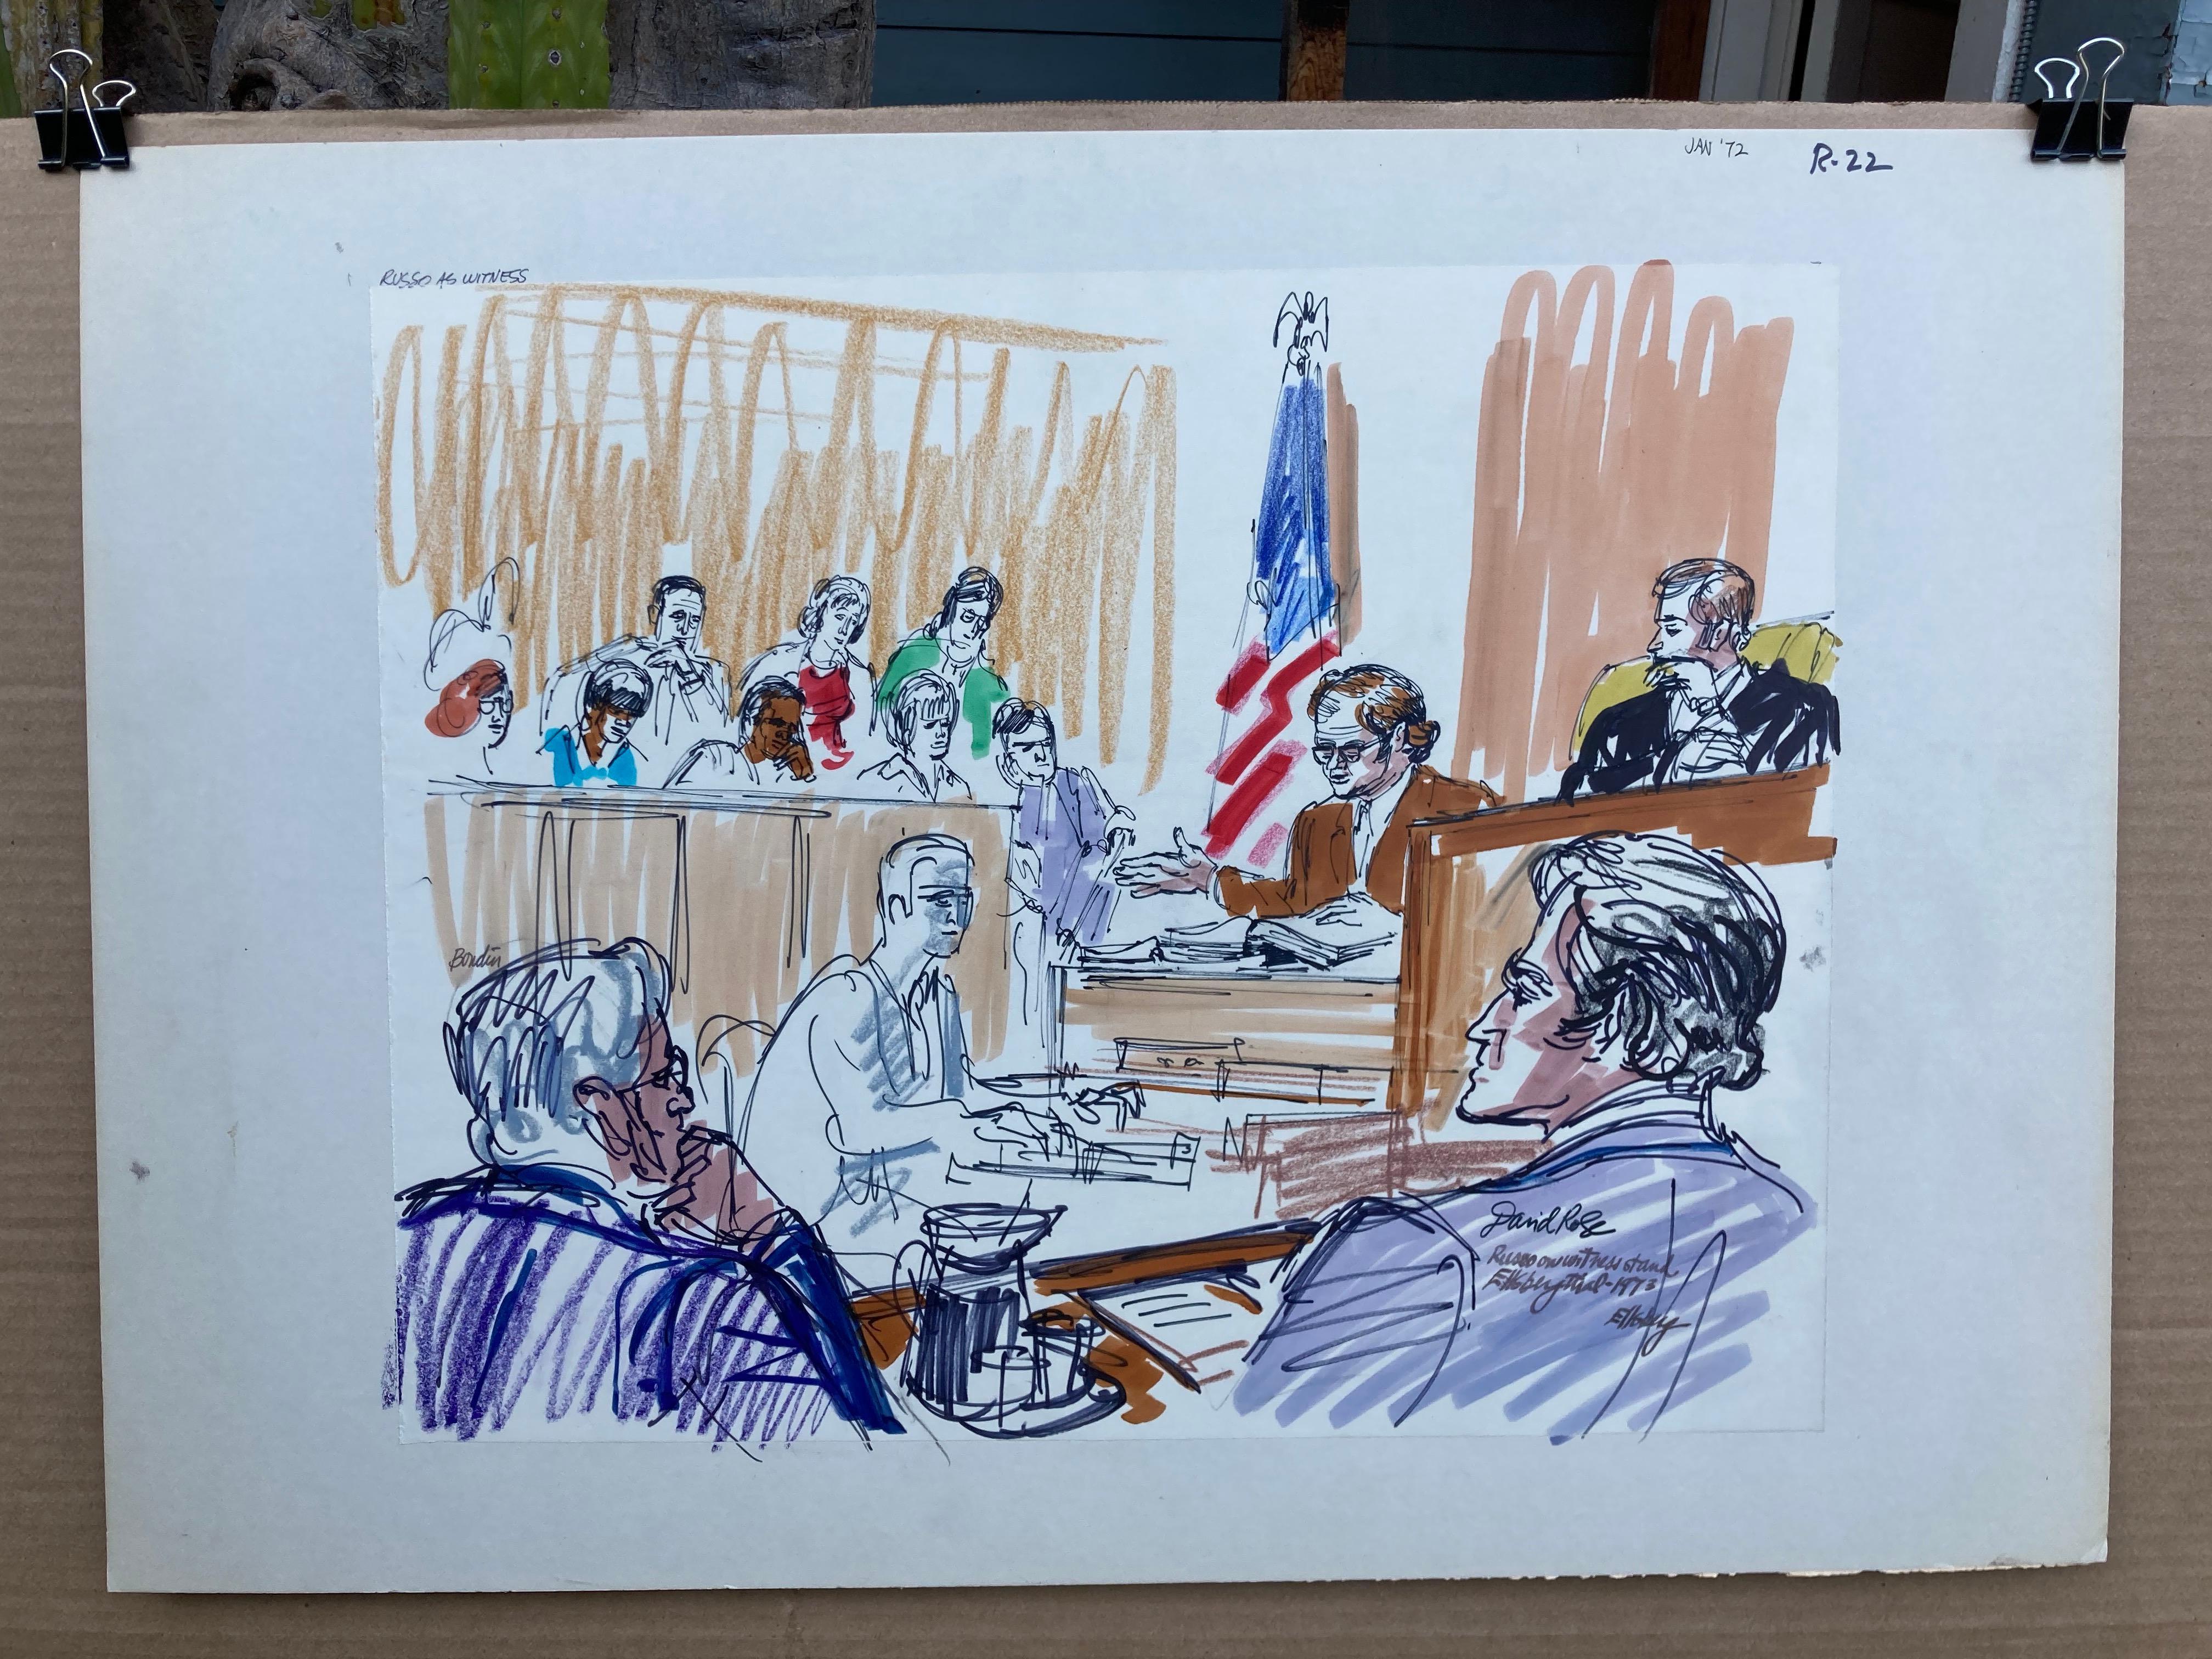 DAVID ROSE (1910 – 2006)

RUSSO ON THE WITNESS STAND, 1973
Color marking pen and ink on tracing paper. Image 16 3/8 x 20 1/8 inches, mount 20 x 28 inches. Attached to mount as created. Original drawing from the infamous Daniel Ellsberg - Pentagon